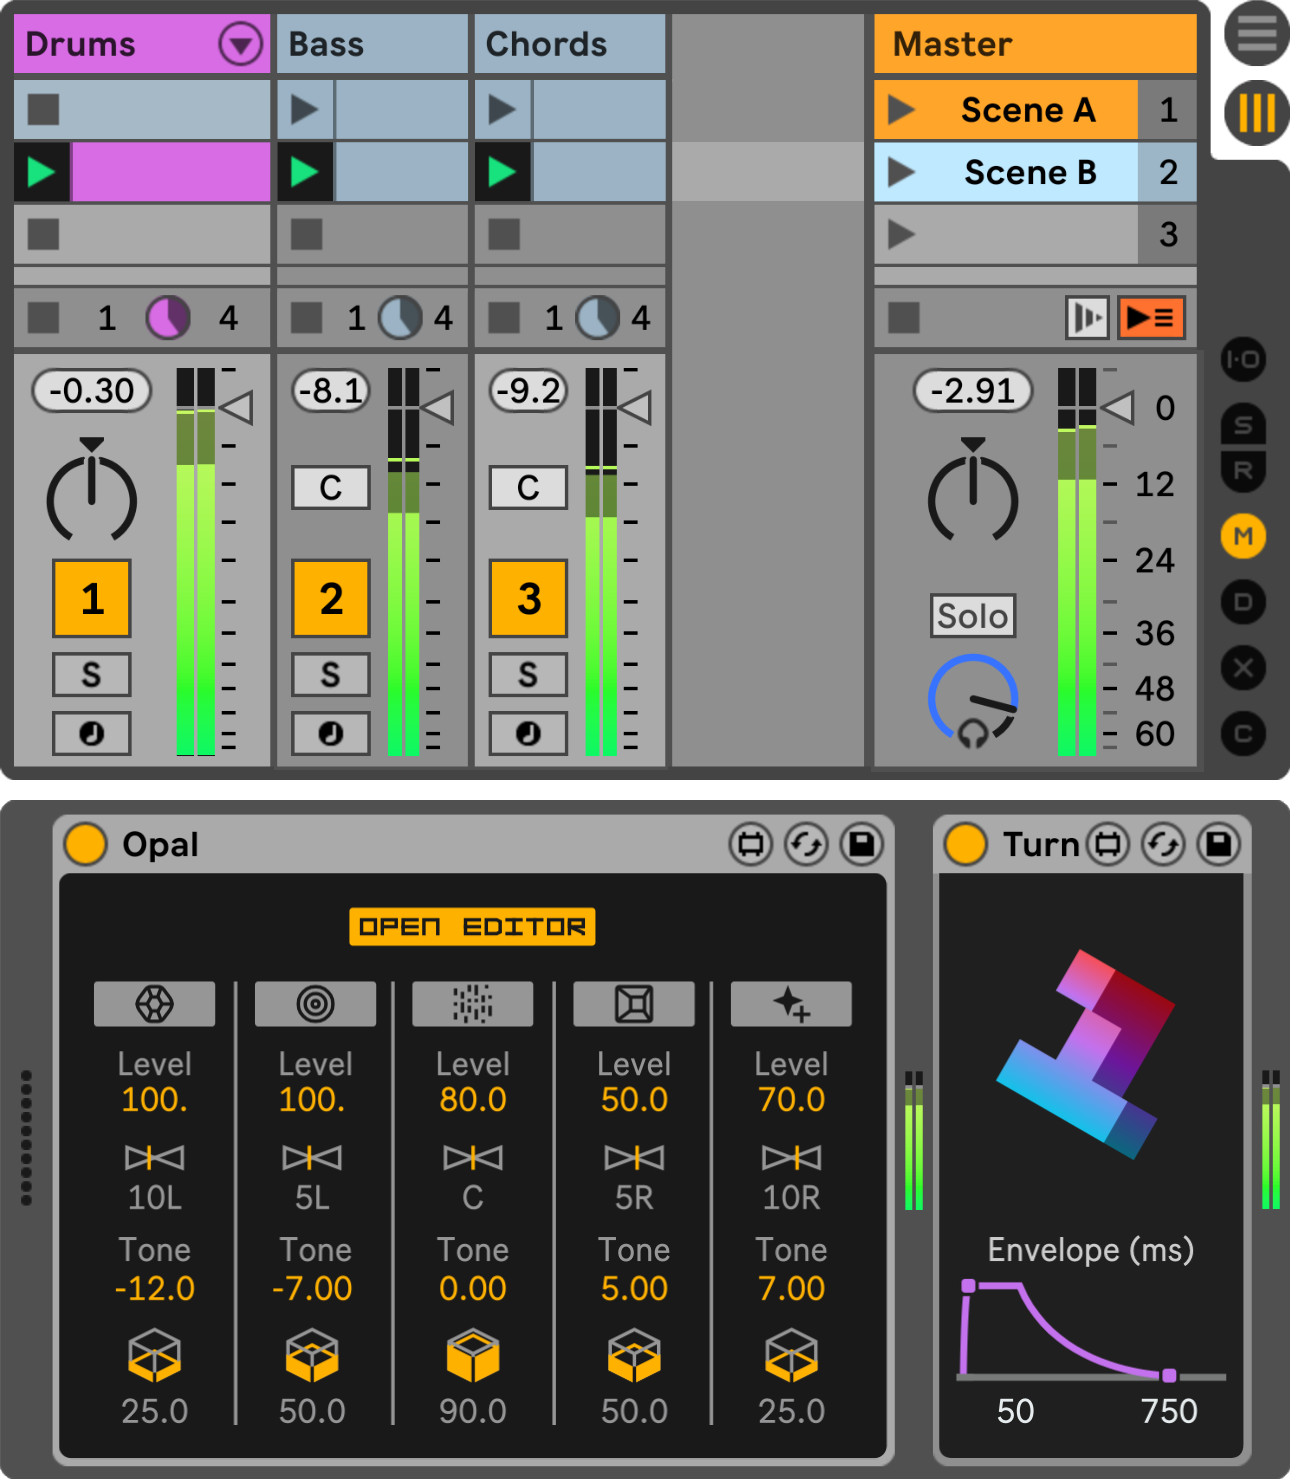 Turn unmutes input audio signals because there is a launched Session View clip on Track 1